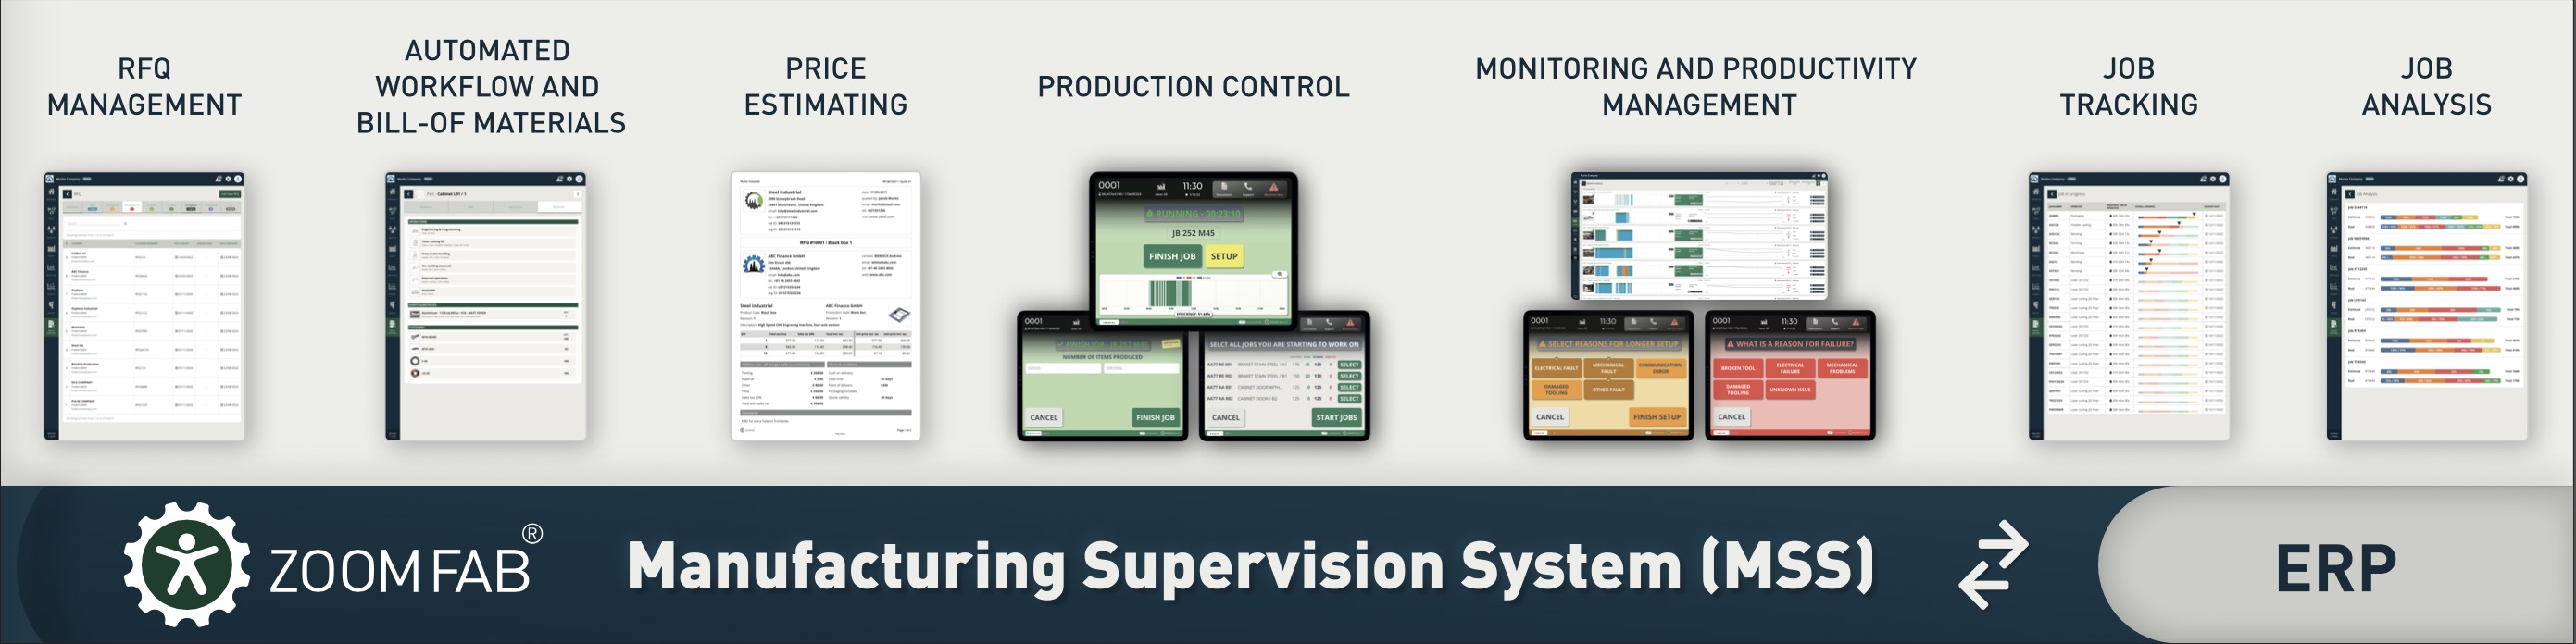 Zoomfab Manufacturing Supervision System